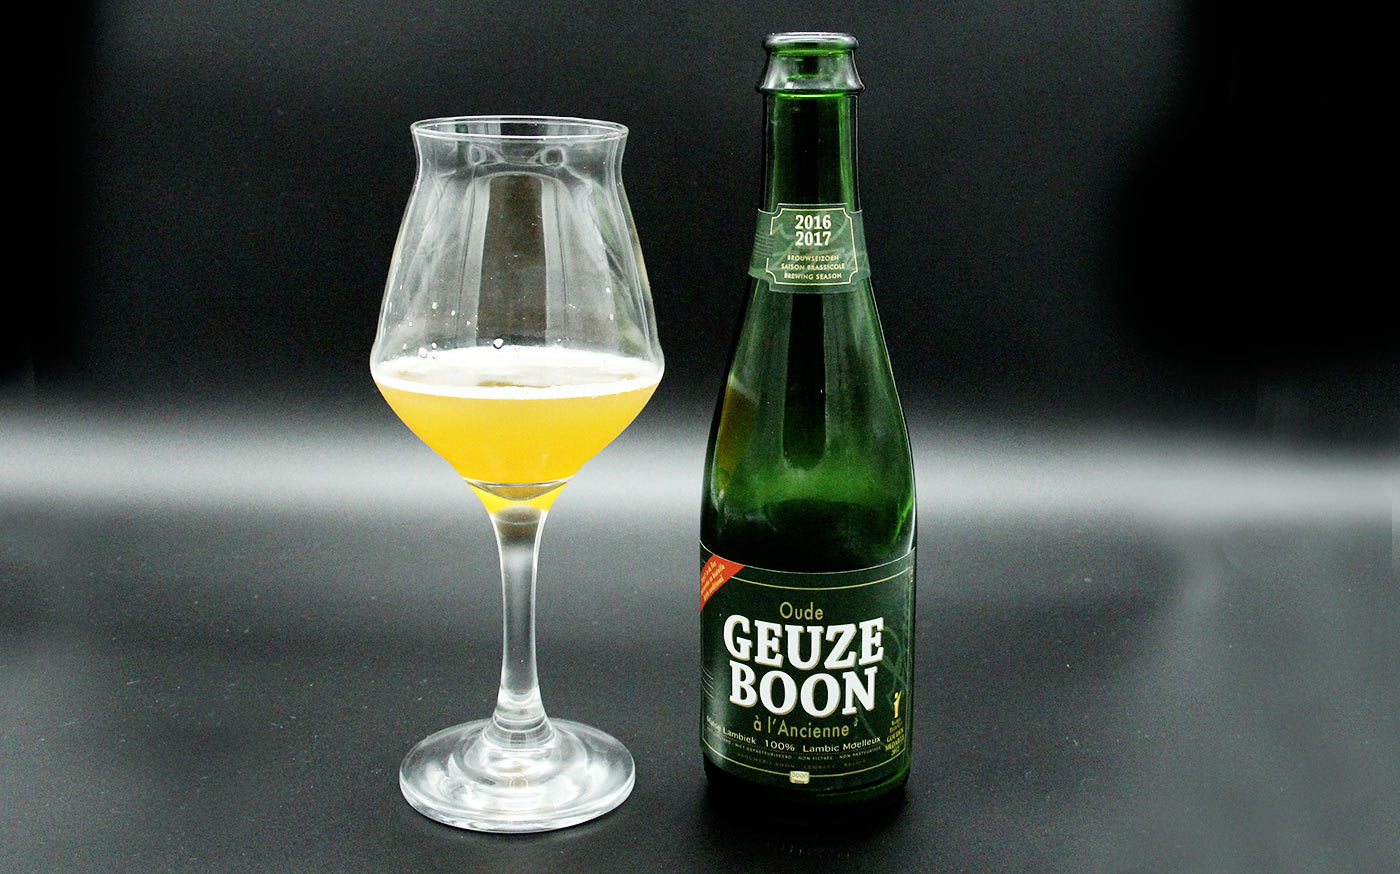 Oude Geuze Boon a l'ancienne 2016 titel